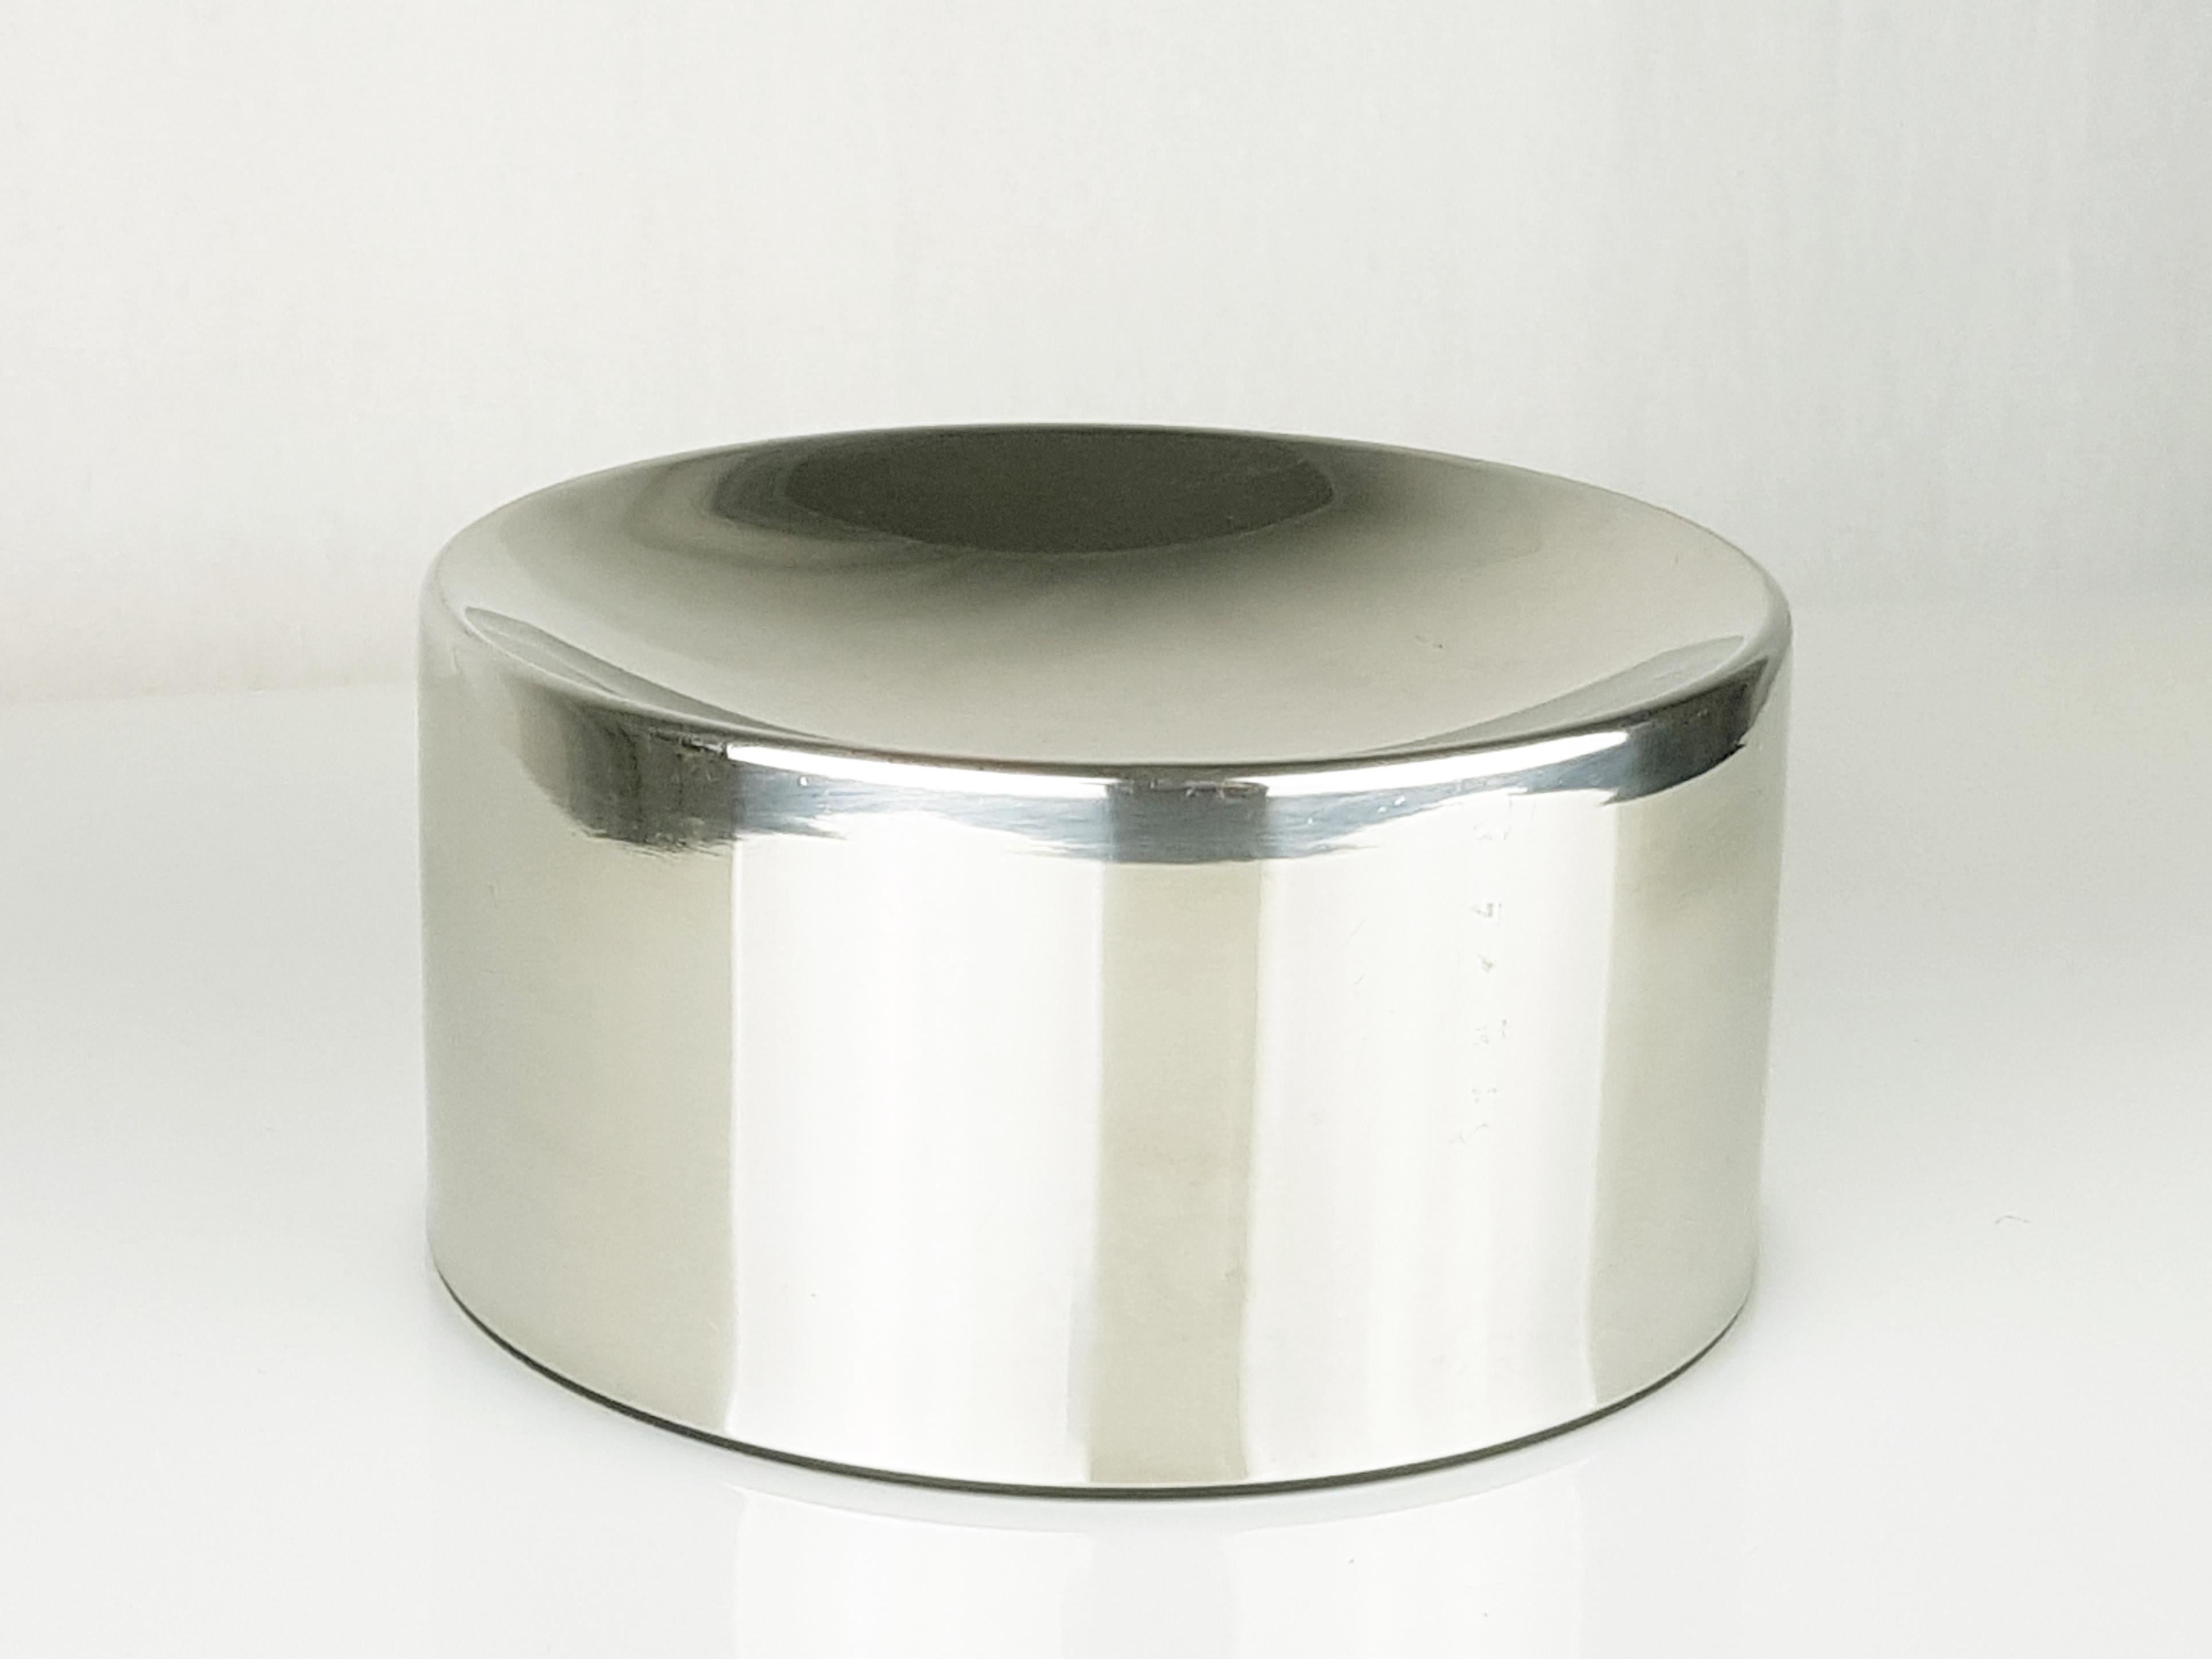 Steel table ashtray with black plastic base designed by emma gismondi schweinberger for Artemide in 1966. Good condition: some light signs of wear due to time and use.